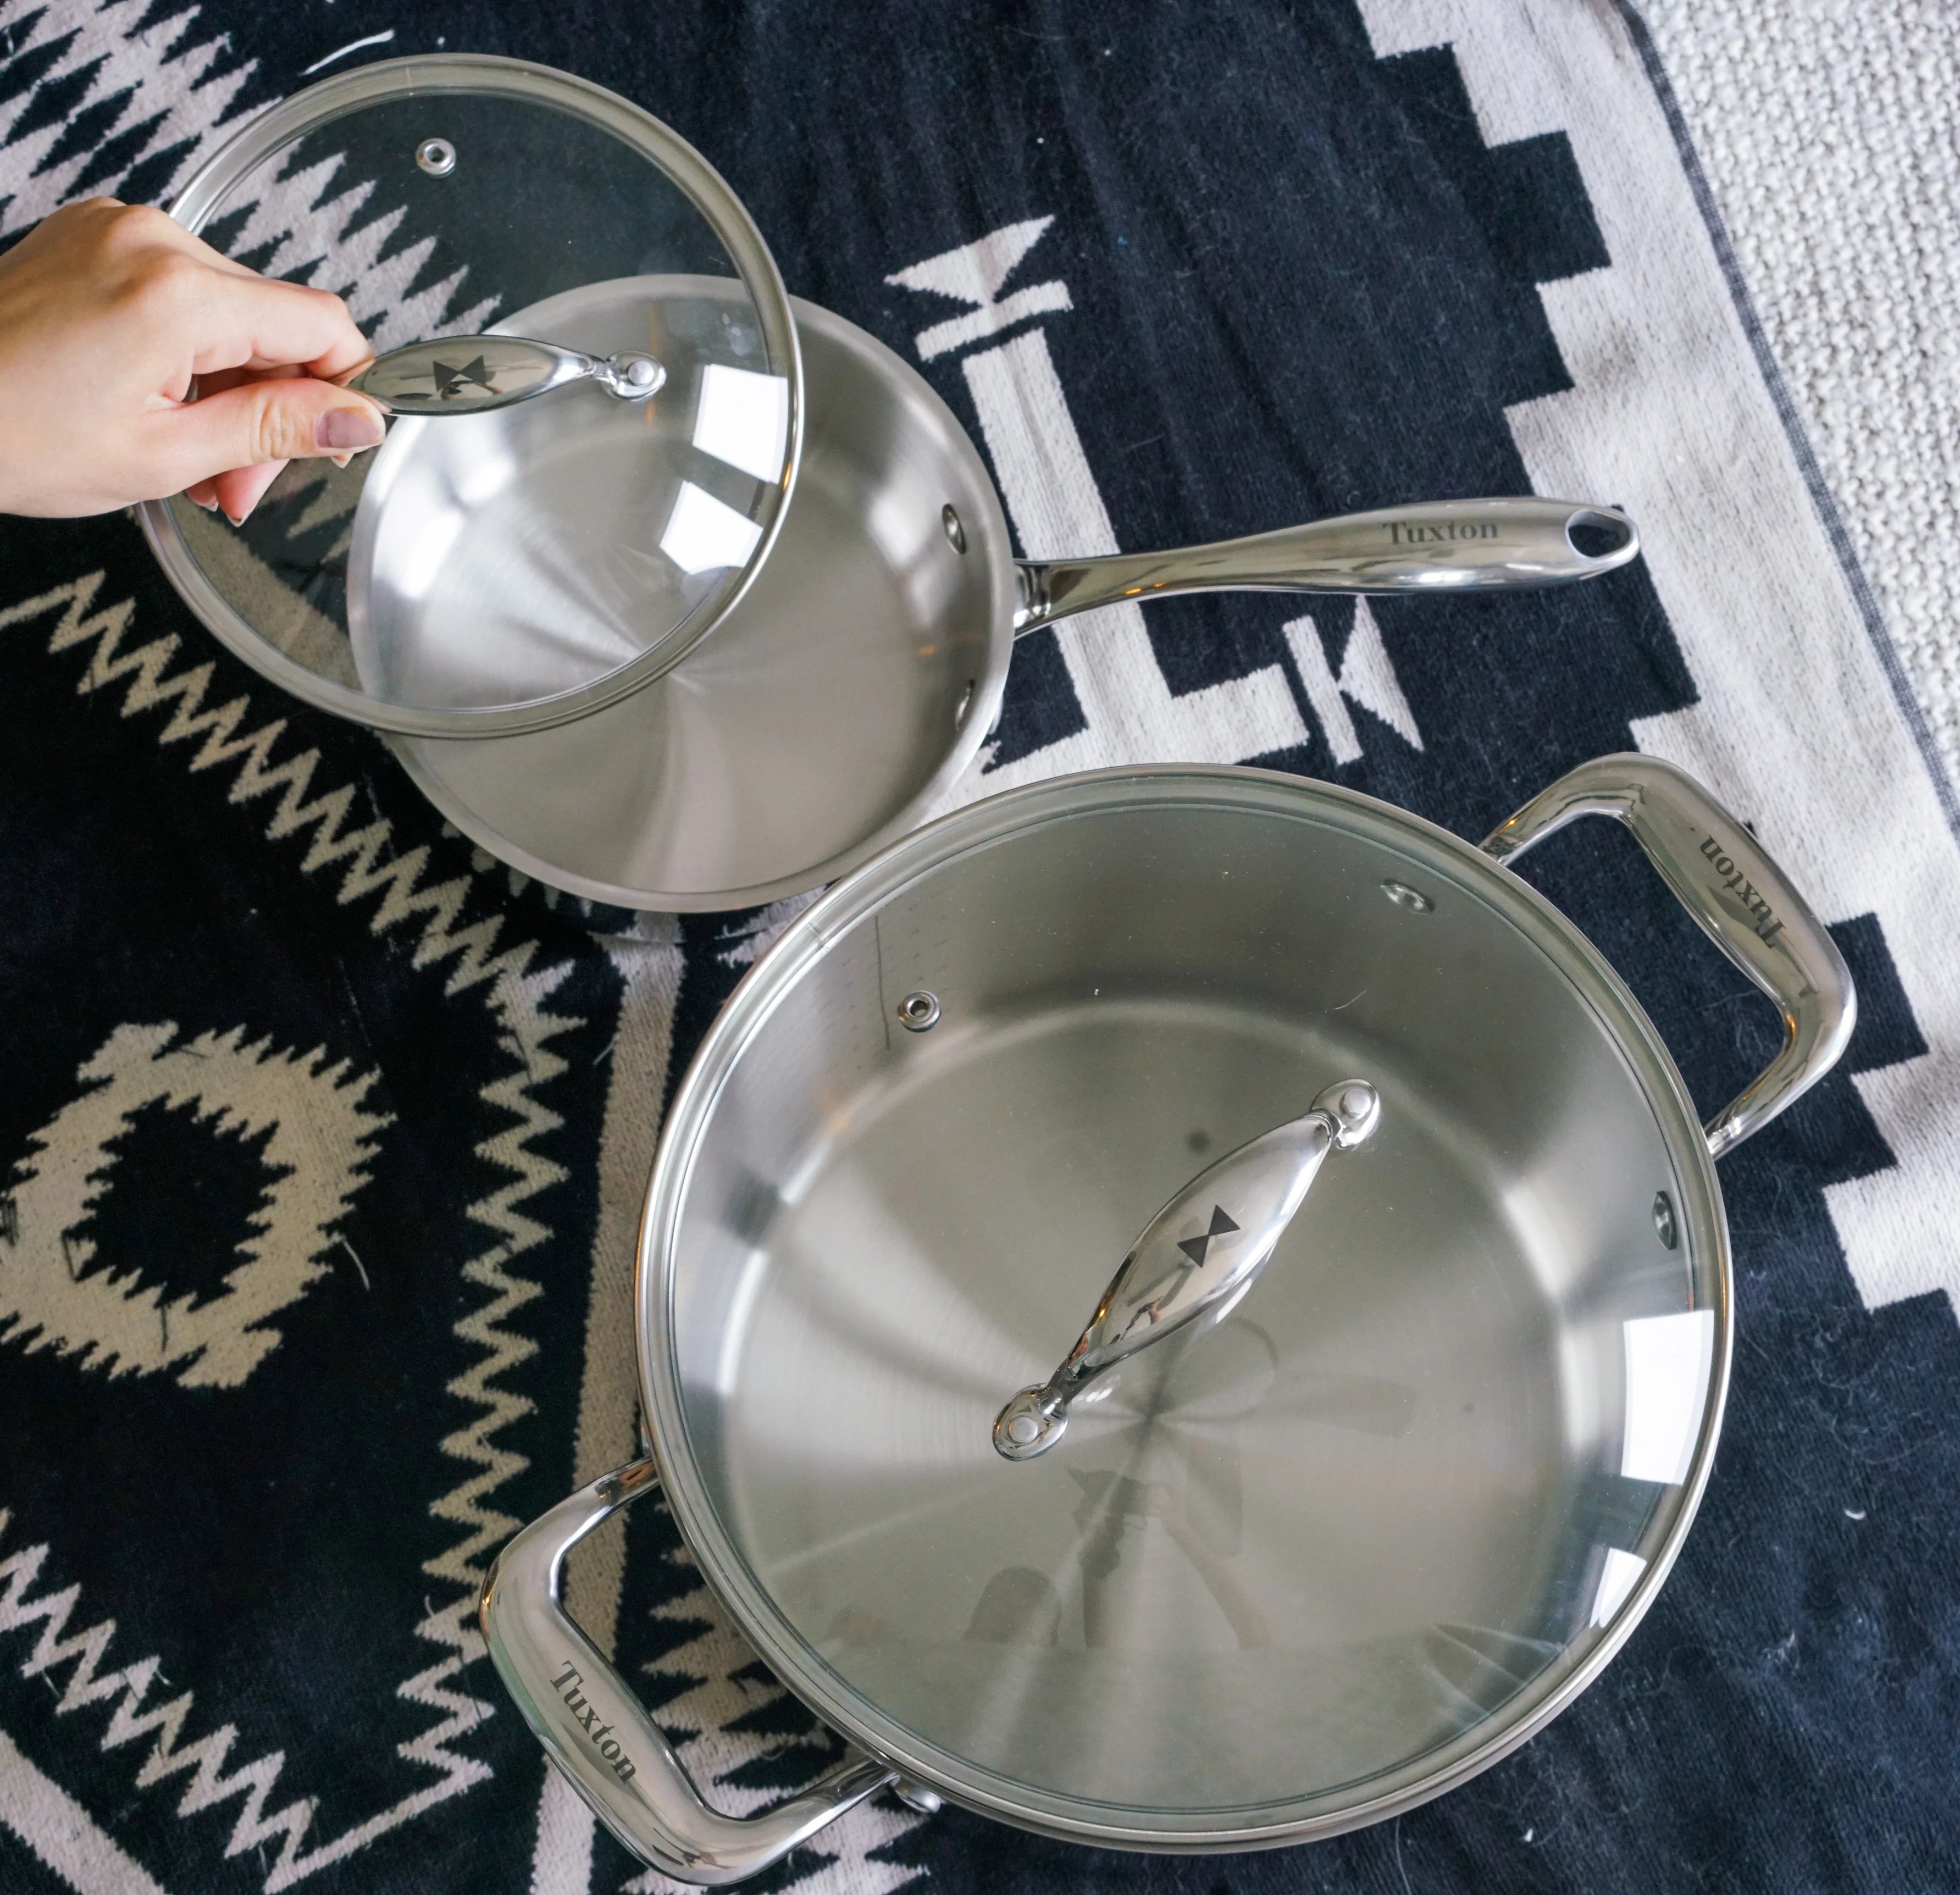 Cook deliciously & sustainably with the Concentrix Stainless Steel Saucepan! Single-ply design, 100% recyclable, chemical-free, & dishwasher-safe. Enjoy healthy cooking & easy cleanup with a lifetime guarantee. Shop now & make a difference!